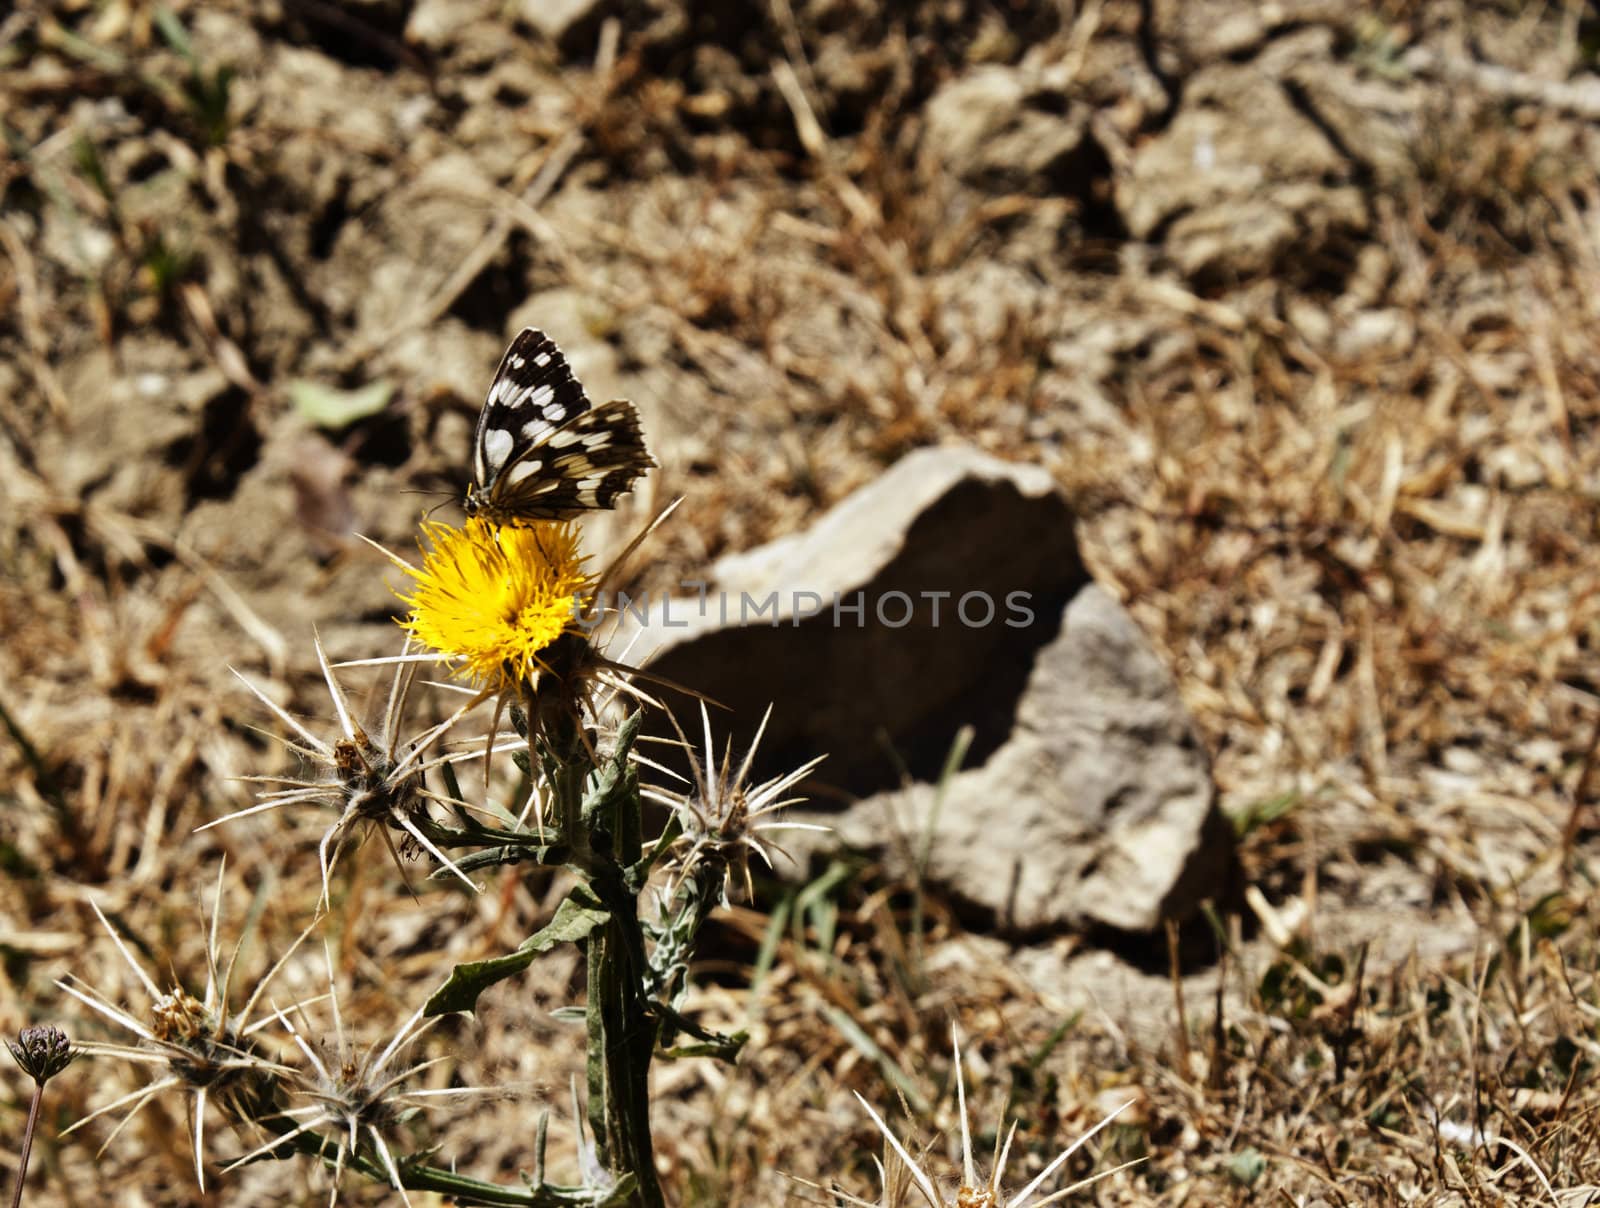 Butterfly on a flower in sicilian countryside. Nebrodi mountains